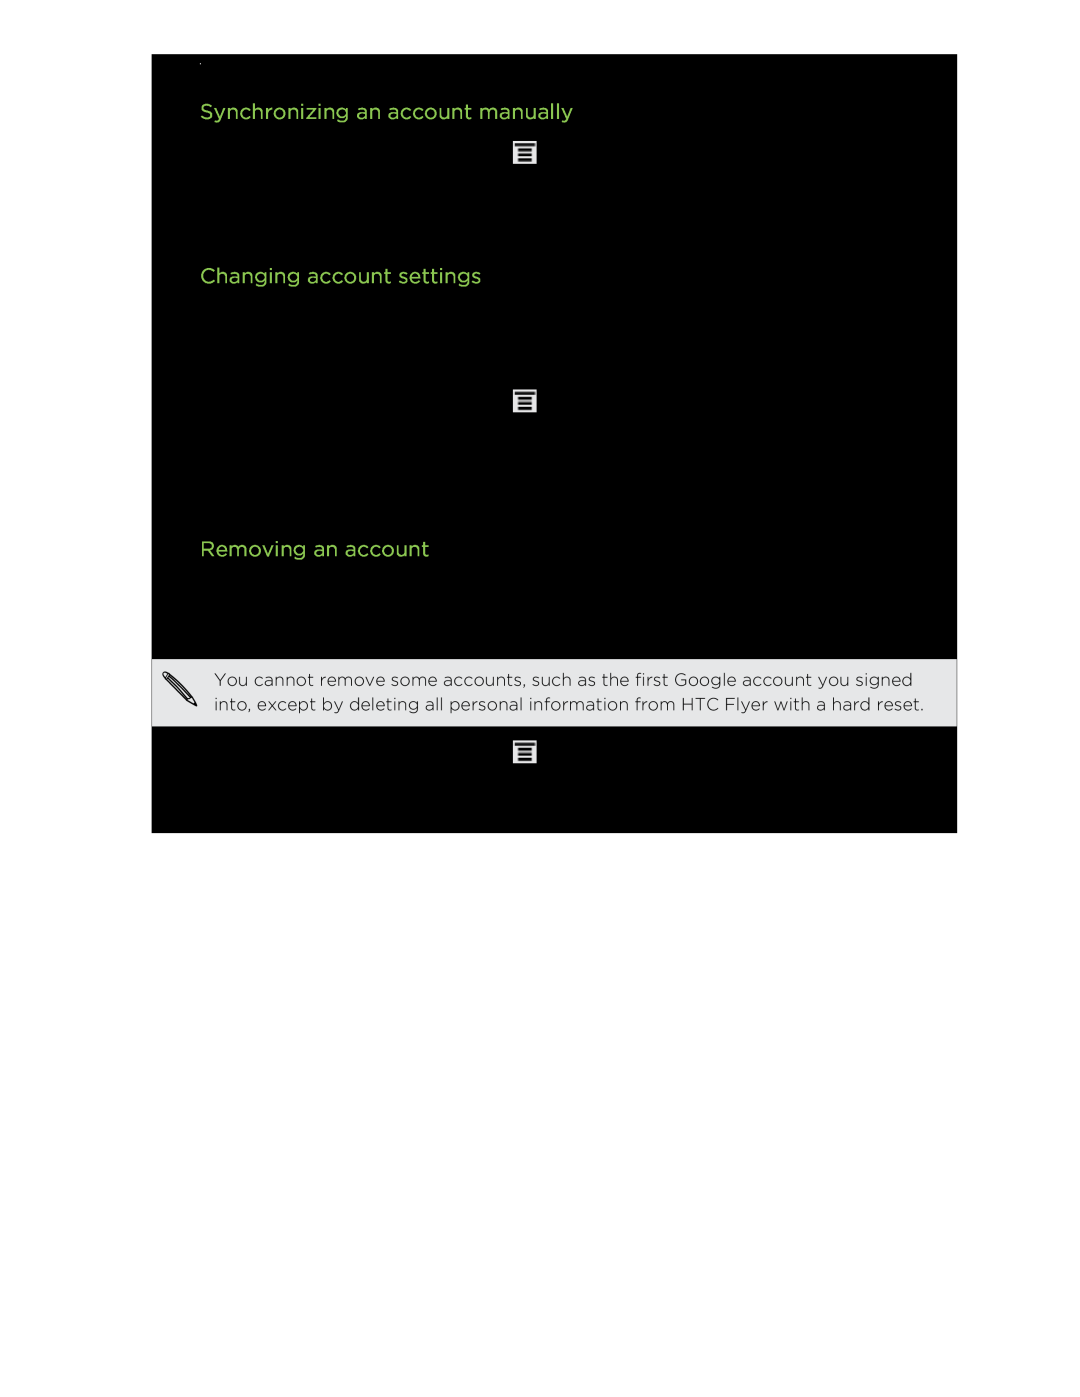 HTC HTCFlyerP512 Synchronizing an account manually, Changing account settings, Removing an account, Accounts and sync 